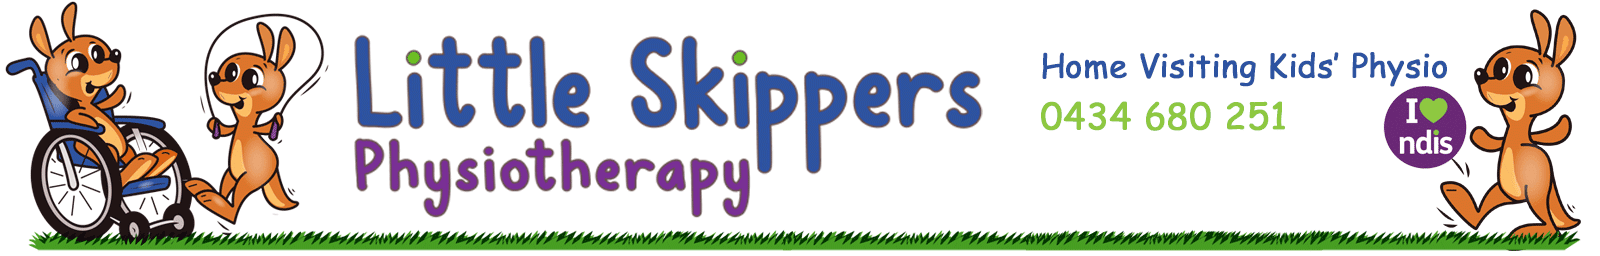 Little Skippers Mobile Paediatric Physiotherapy